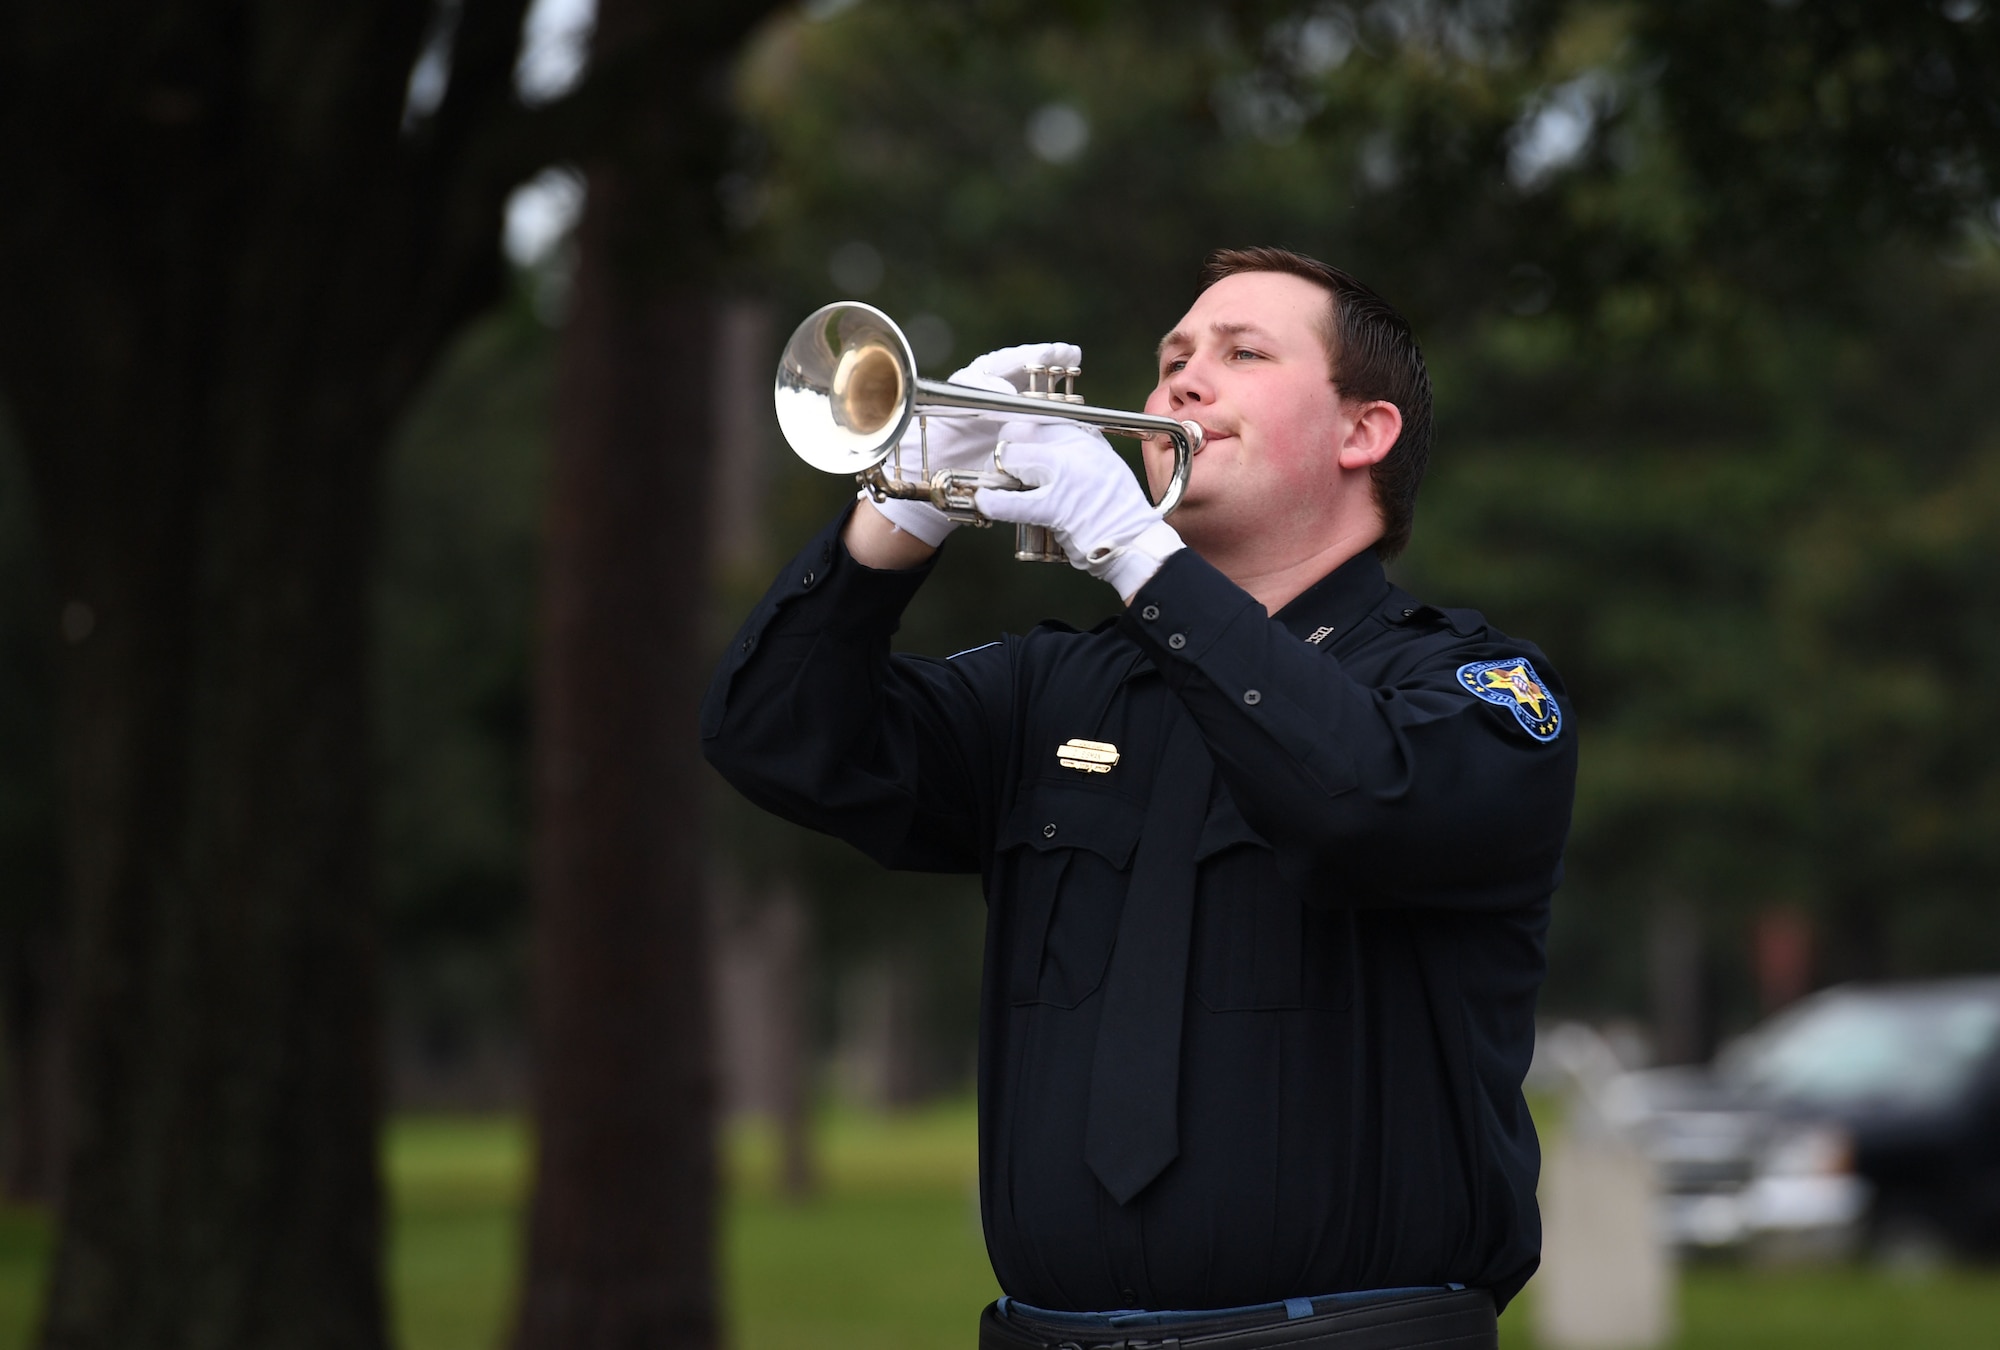 Deputy David Eisman, Harrison County Sheriff's Office deputy, plays Taps on his bugle during a 9/11 ceremony in front of the 81st Training Wing headquarters building at Keesler Air Force Base, Mississippi, Sept. 9, 2022. The event honored those who lost their lives during the 9/11 attacks. (U.S. Air Force photo by Kemberly Groue)